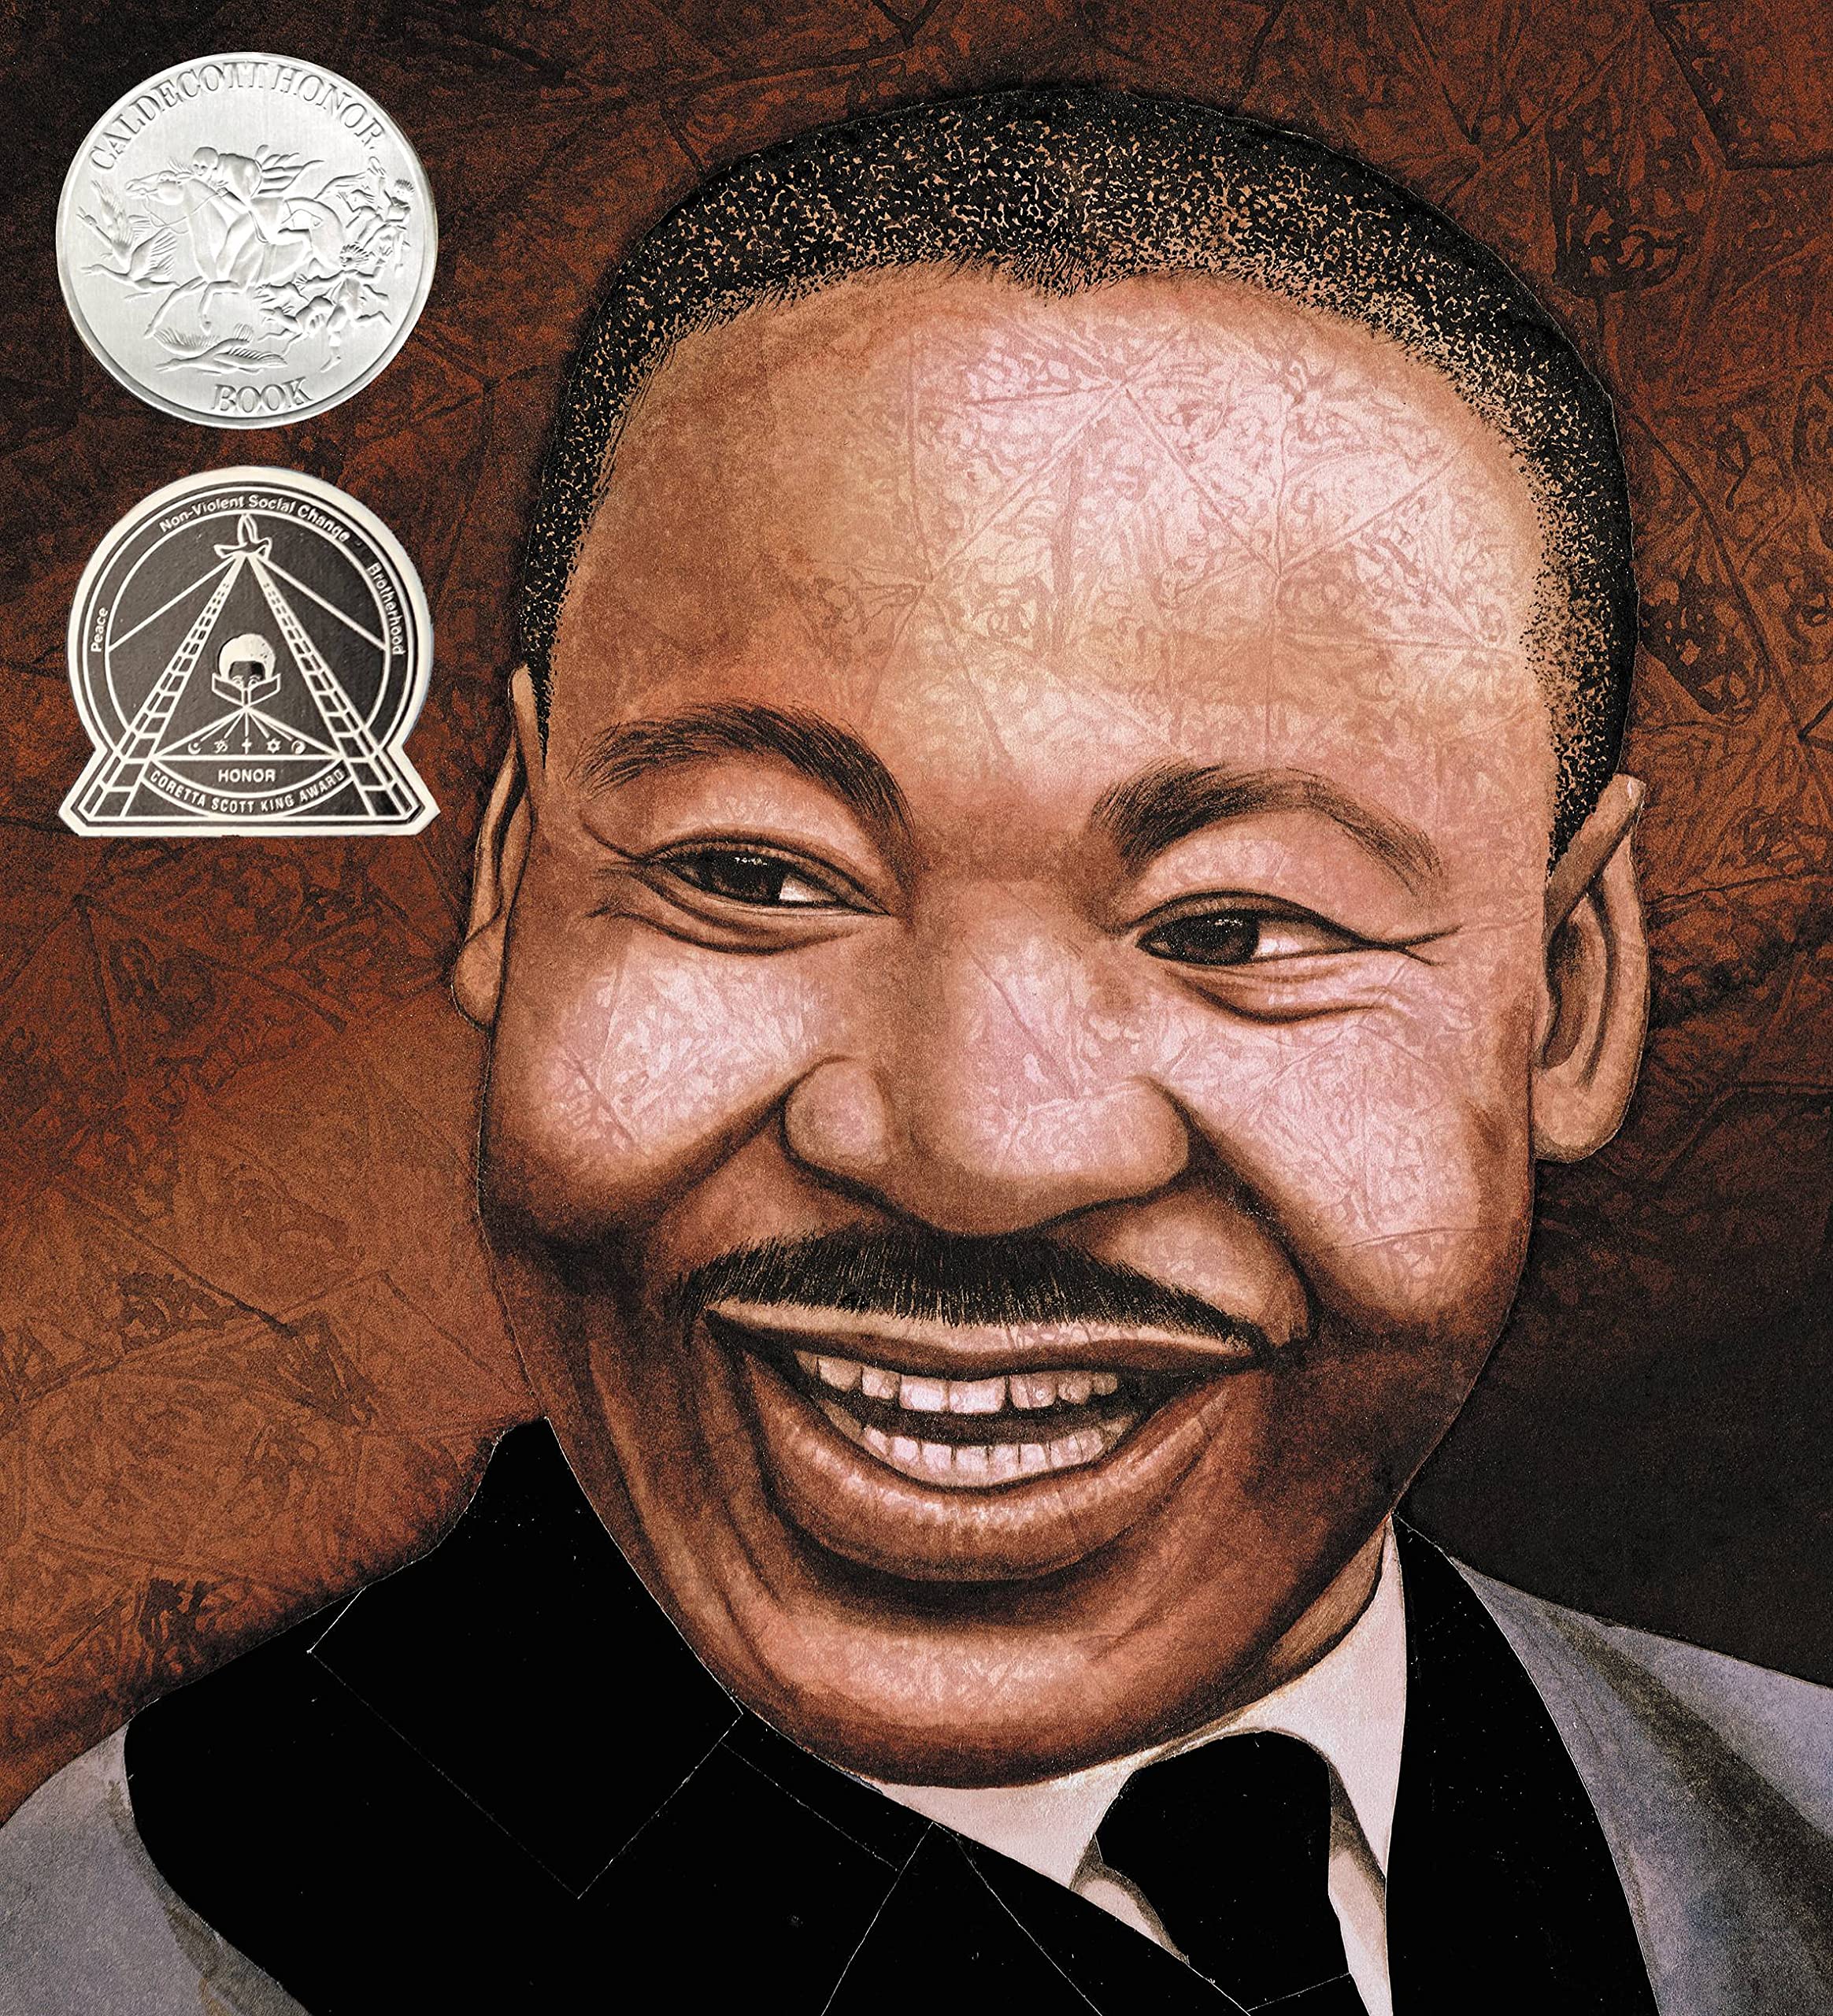 Martin's Big Words: The Life of Dr. Martin Luther King, Jr. (Caldecott Honor Book) (A Big Words Book, 1)